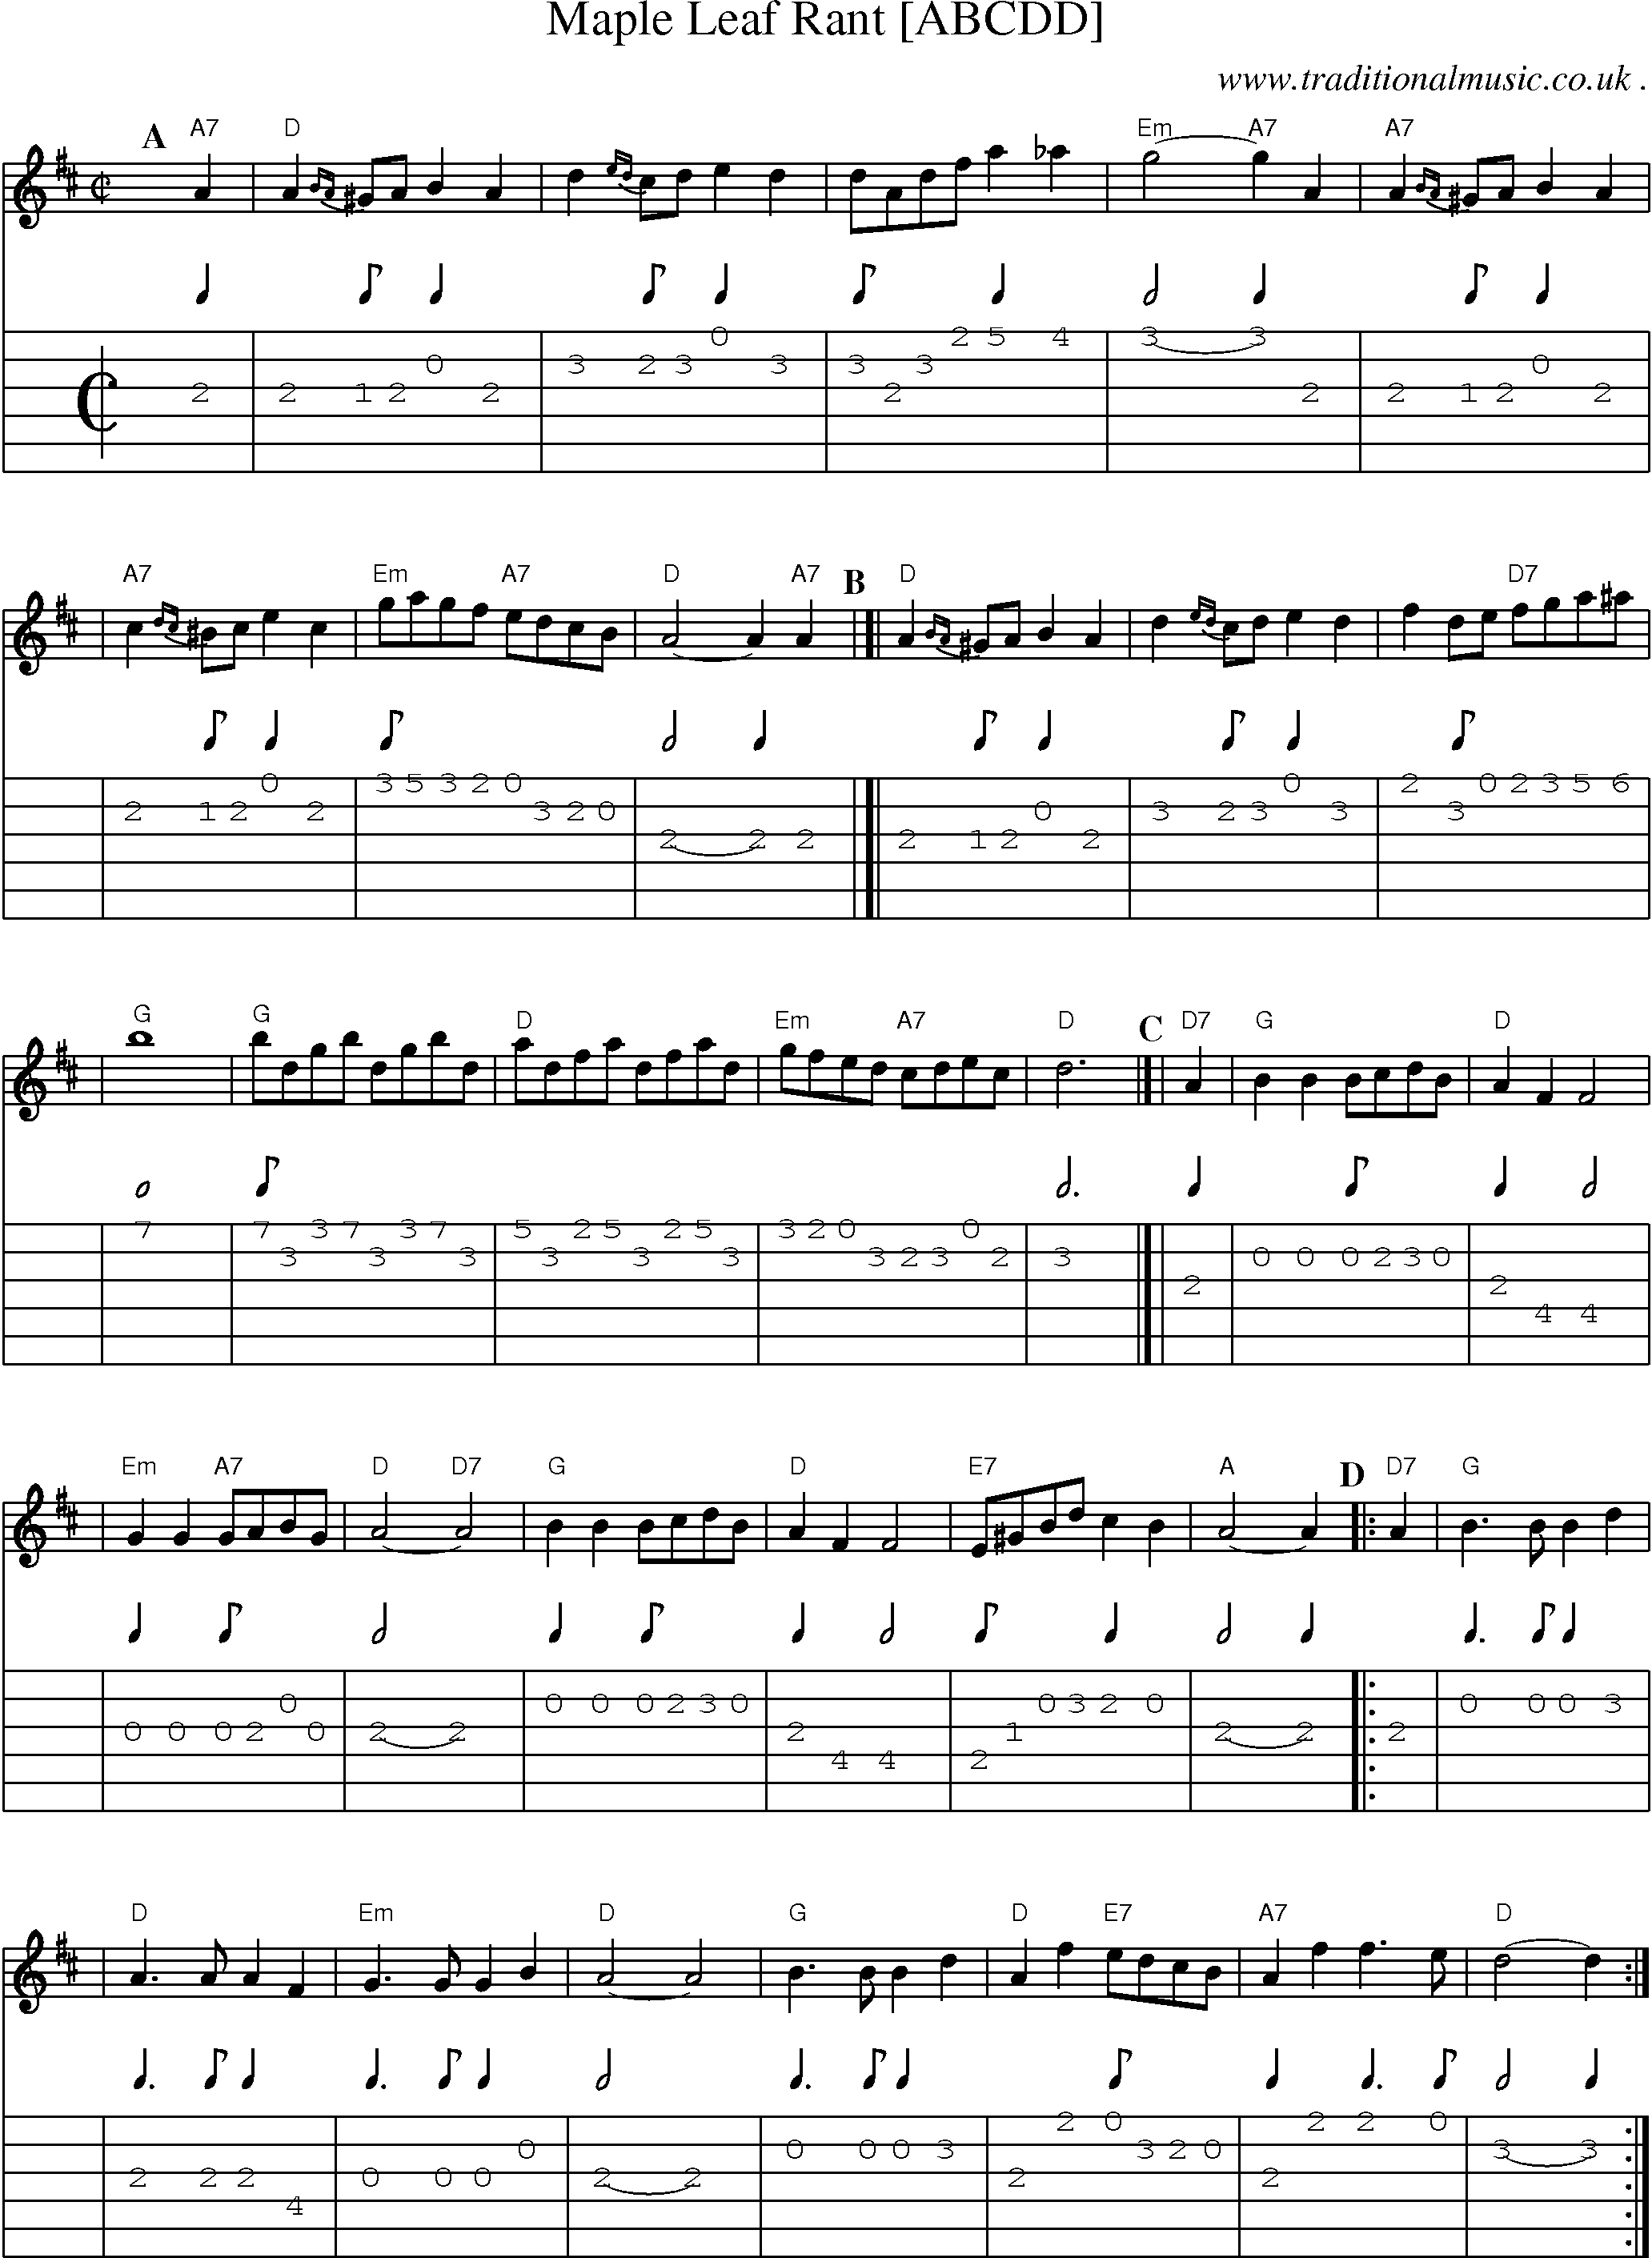 Sheet-music  score, Chords and Guitar Tabs for Maple Leaf Rant [abcdd]